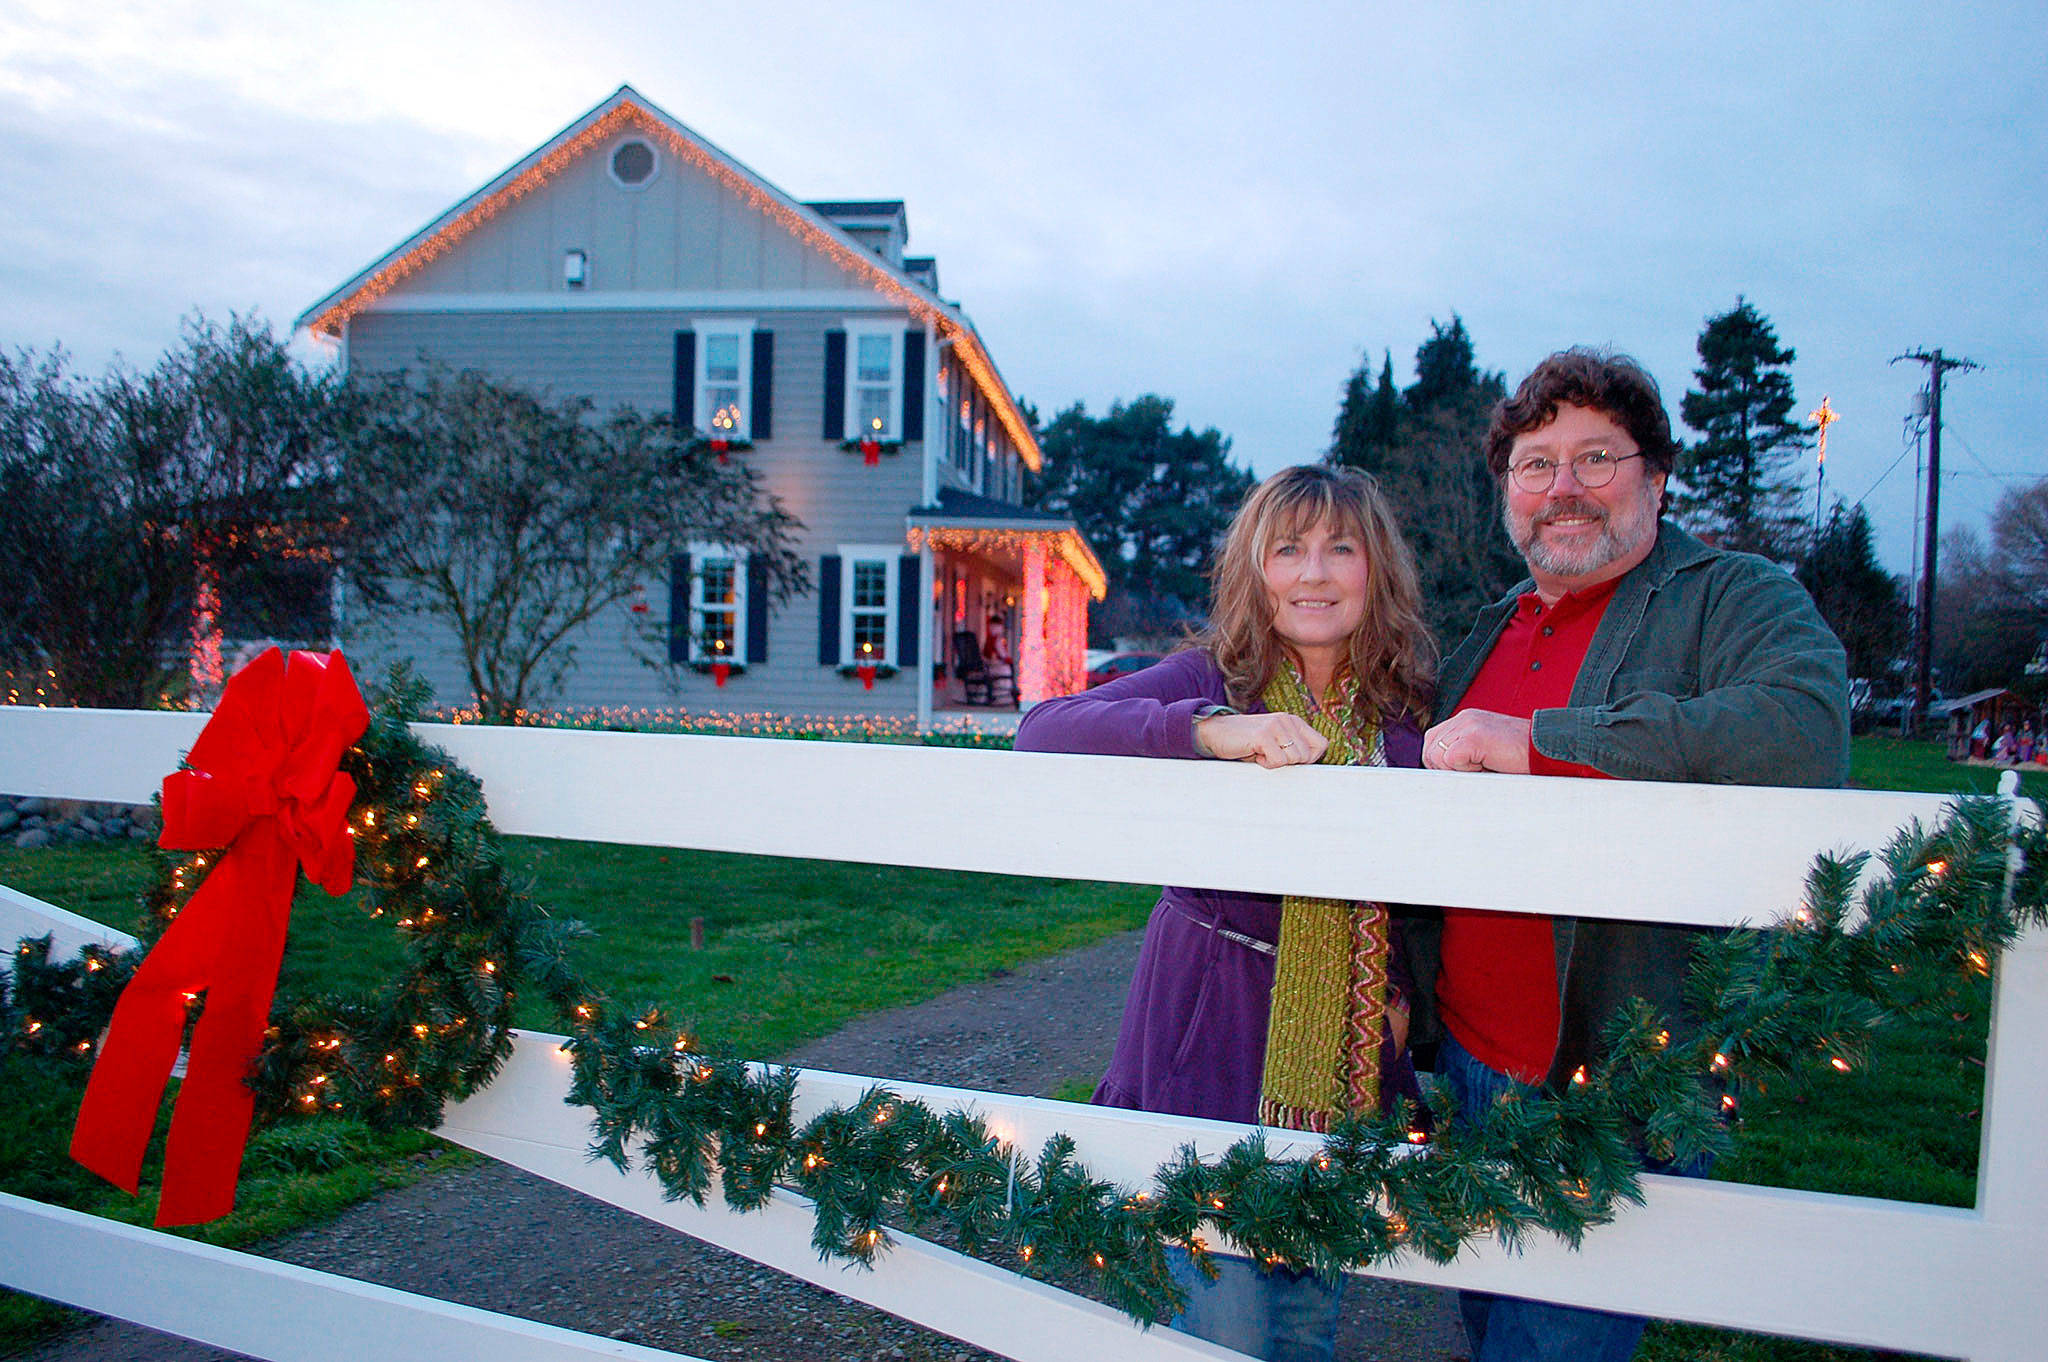 Linda and Dave Donaghay have decorated their house at 111 Cays Road in Sequim with a variety of Christmas lights and decorations, including a manger scene. (Erin Hawkins/Olympic Peninsula News Group)